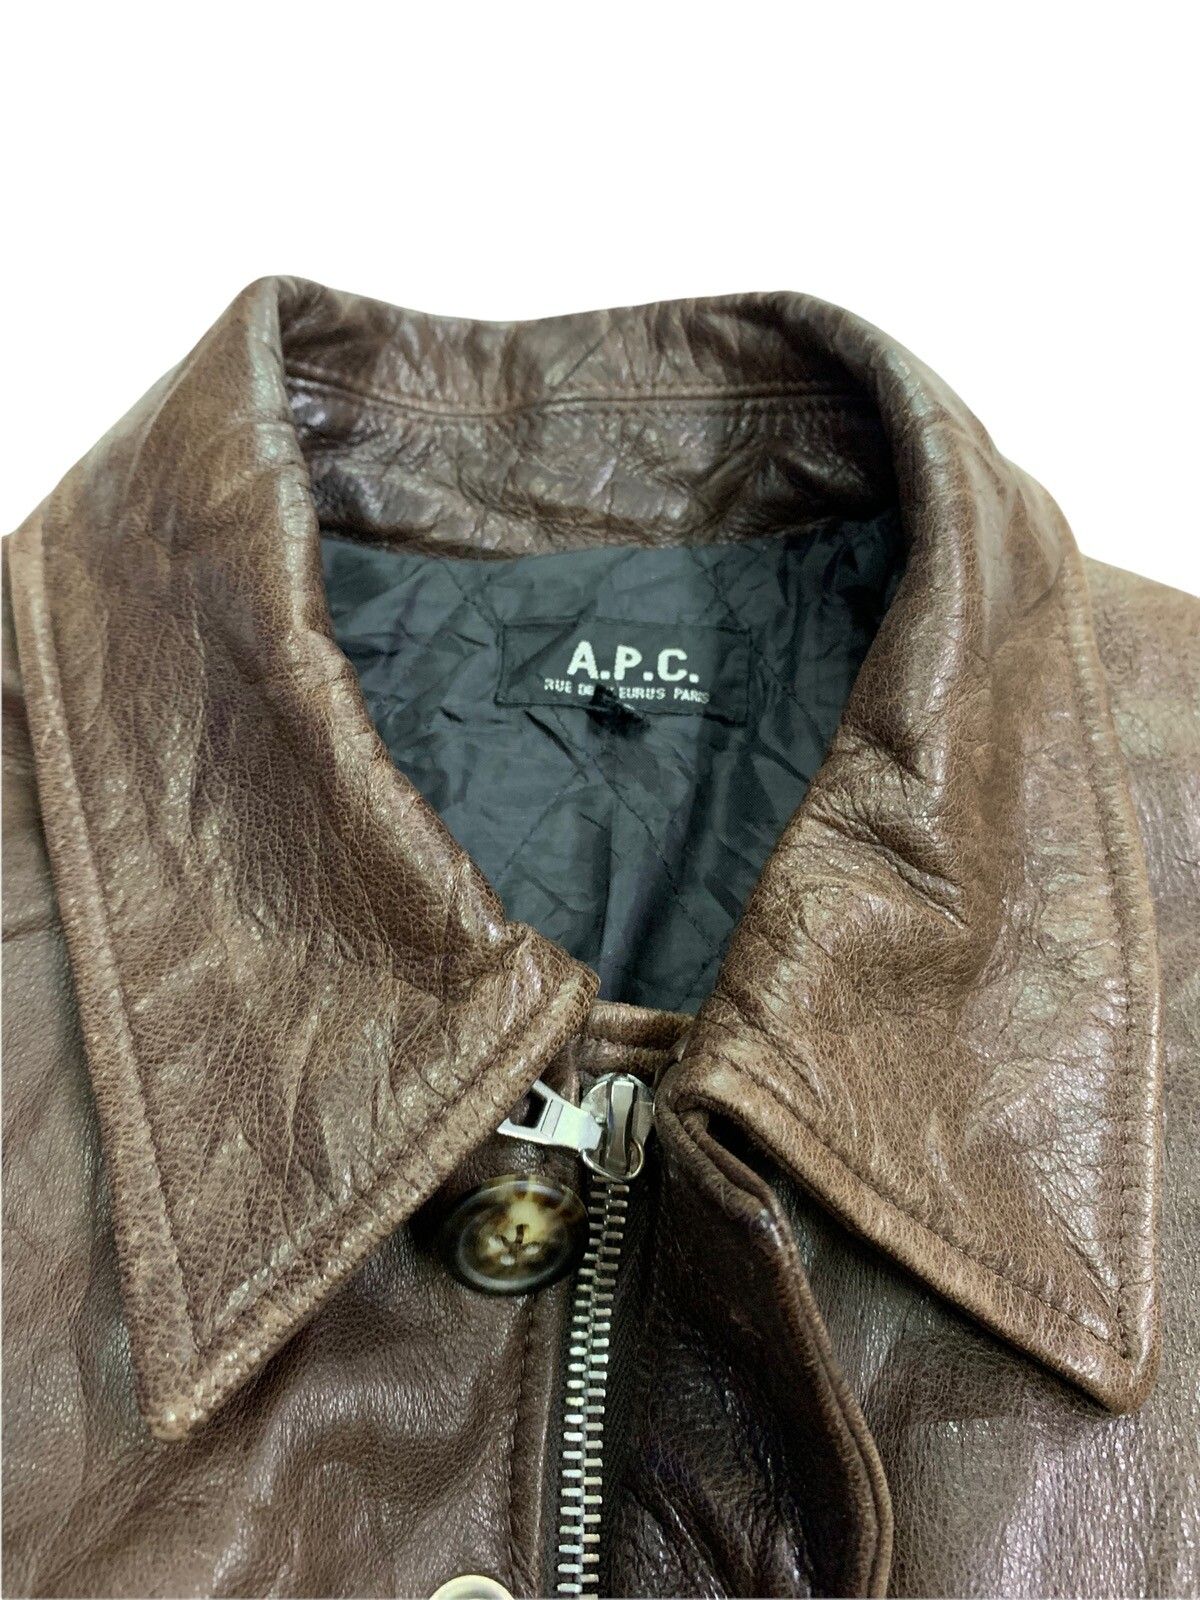 🔥RARE A.P.C LEATHER JACKETS BROWN - 7